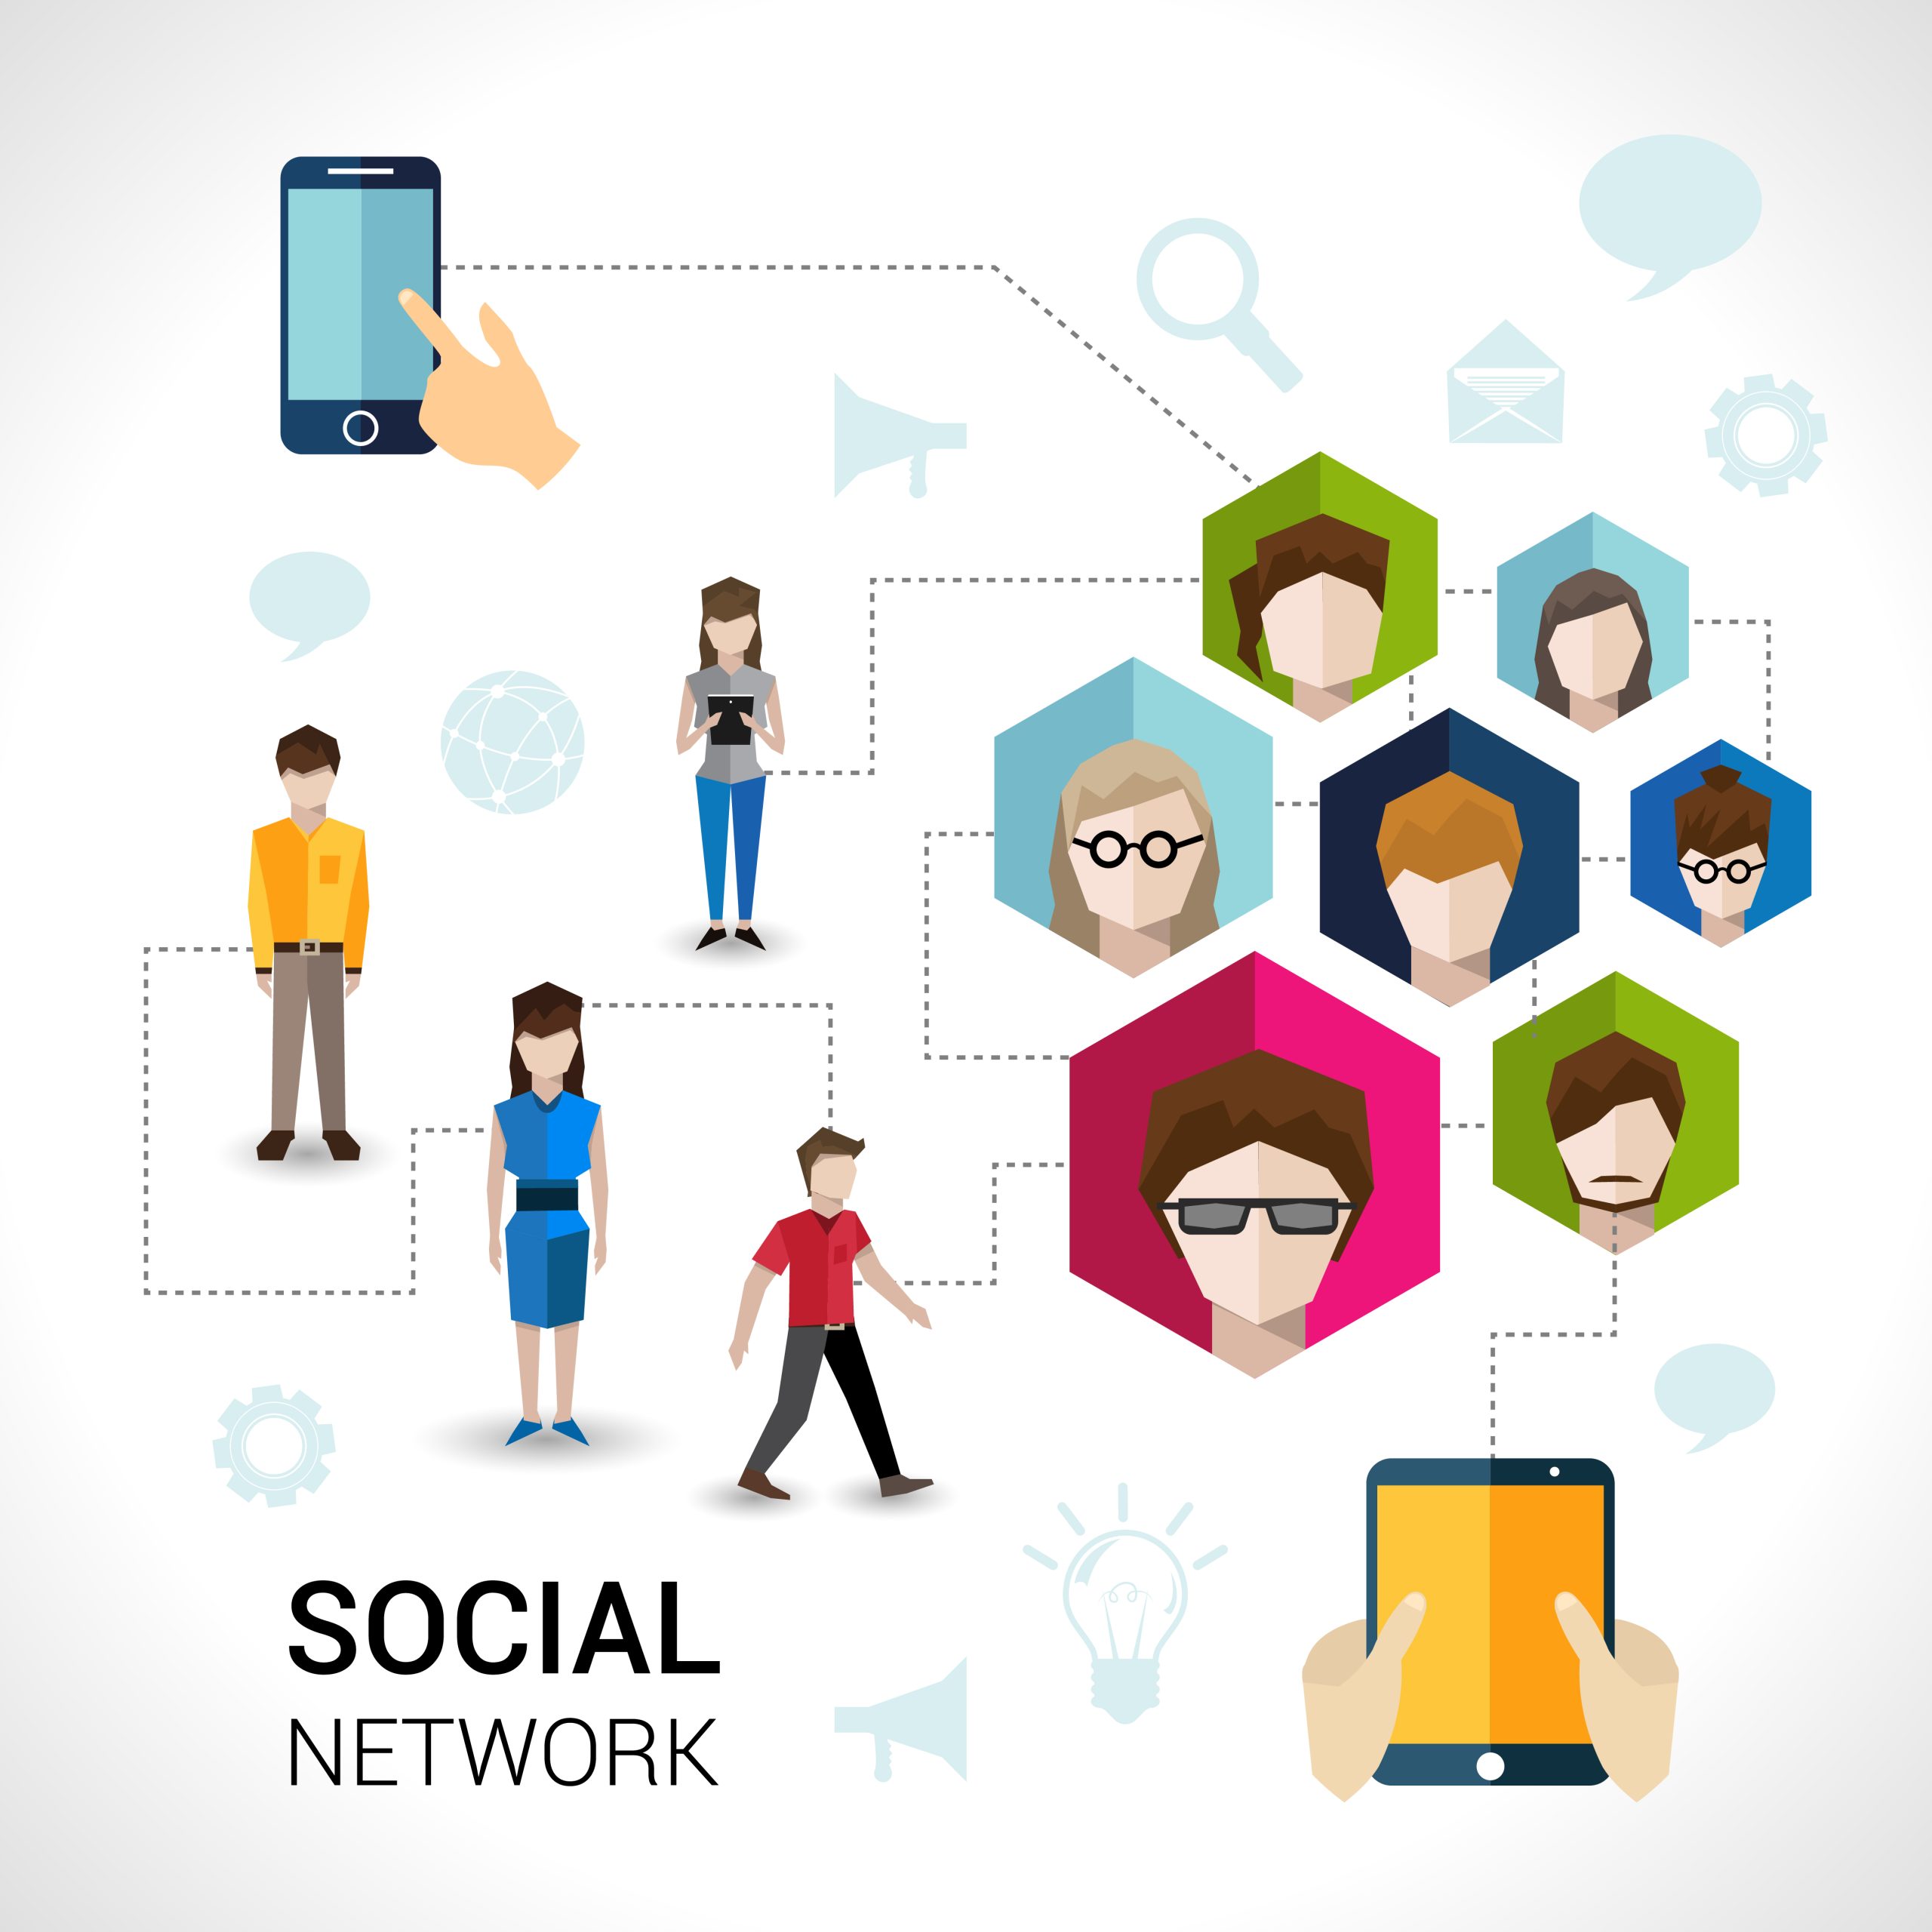 Private social network